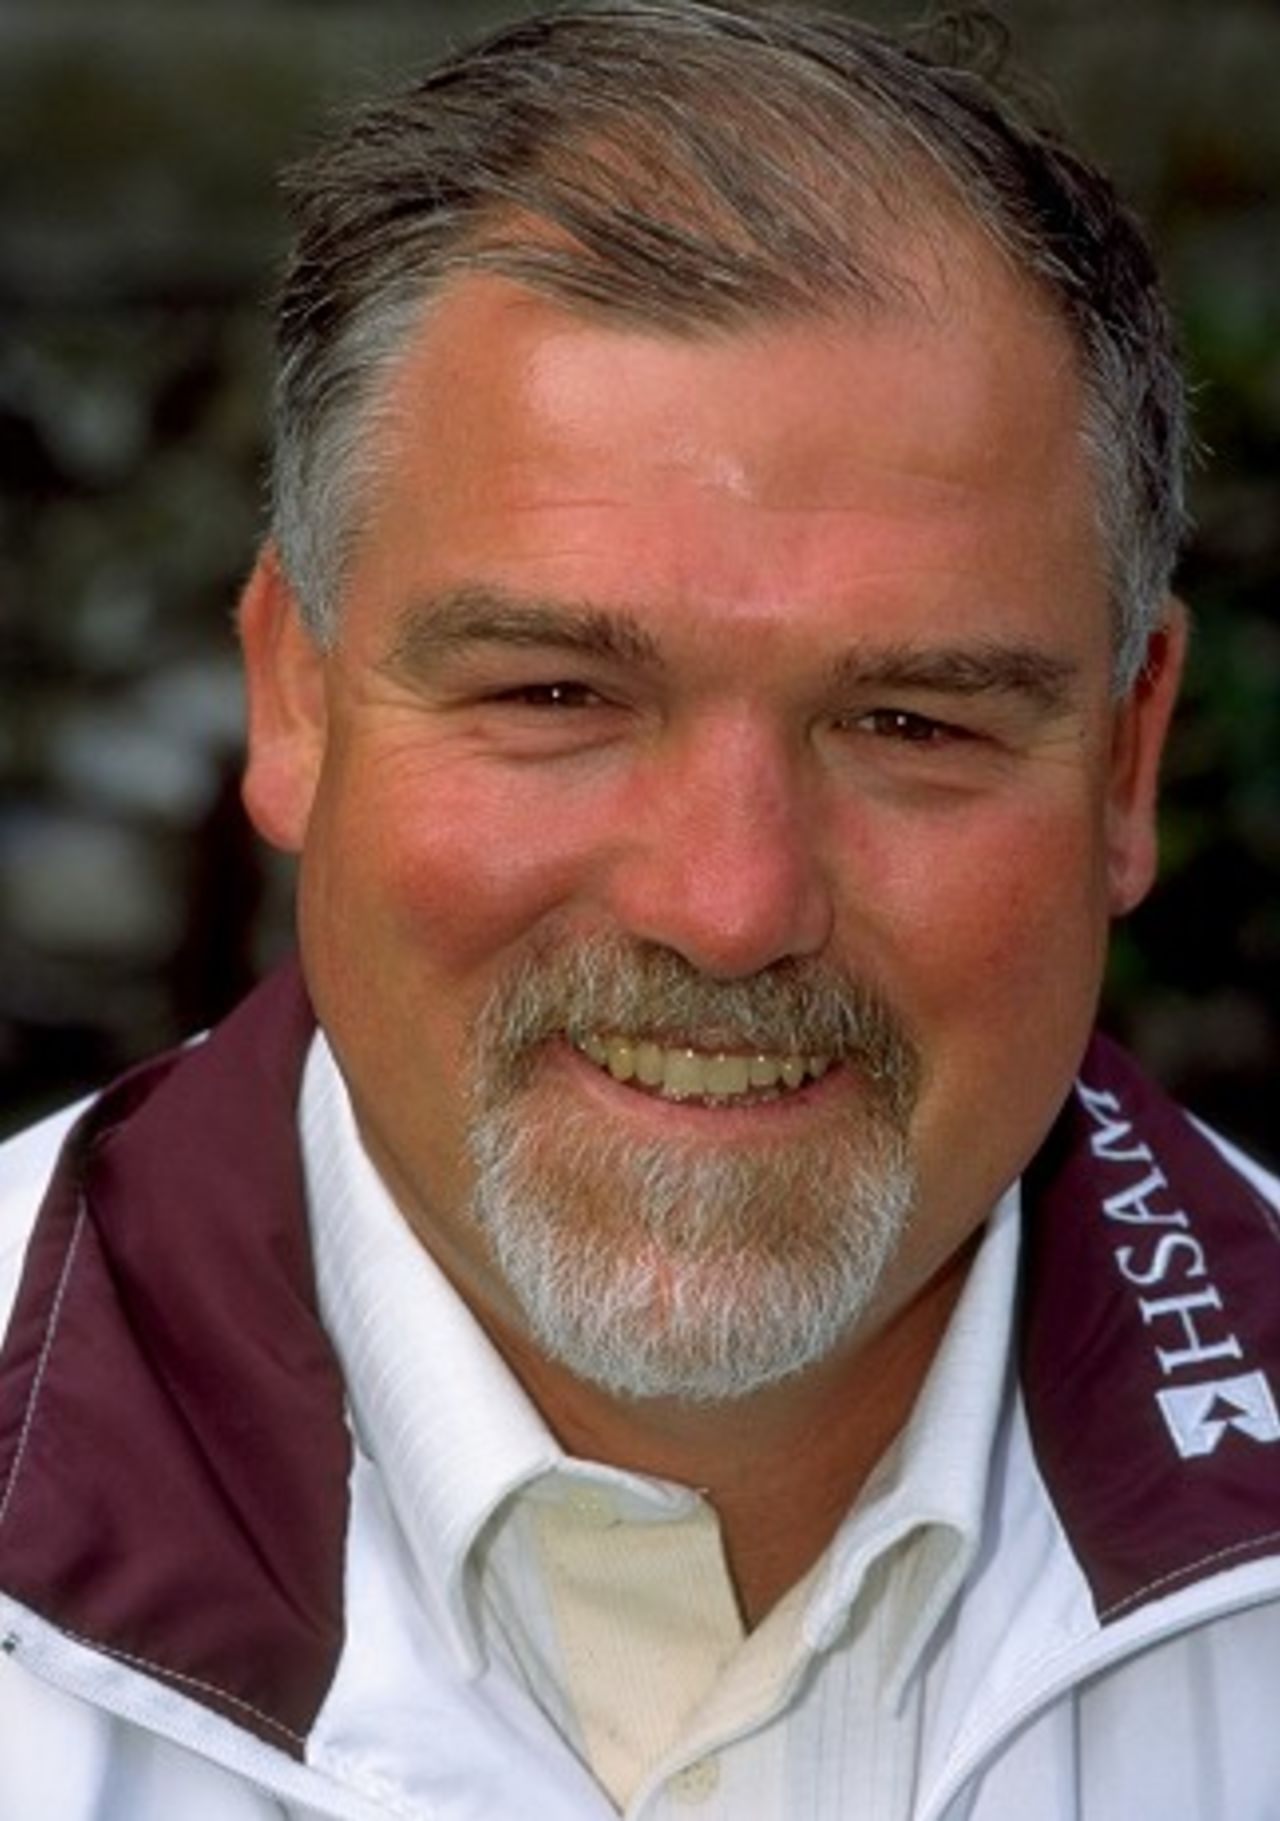 6 Apr 1999: Portrait of Mike Gatting of Middlesex.